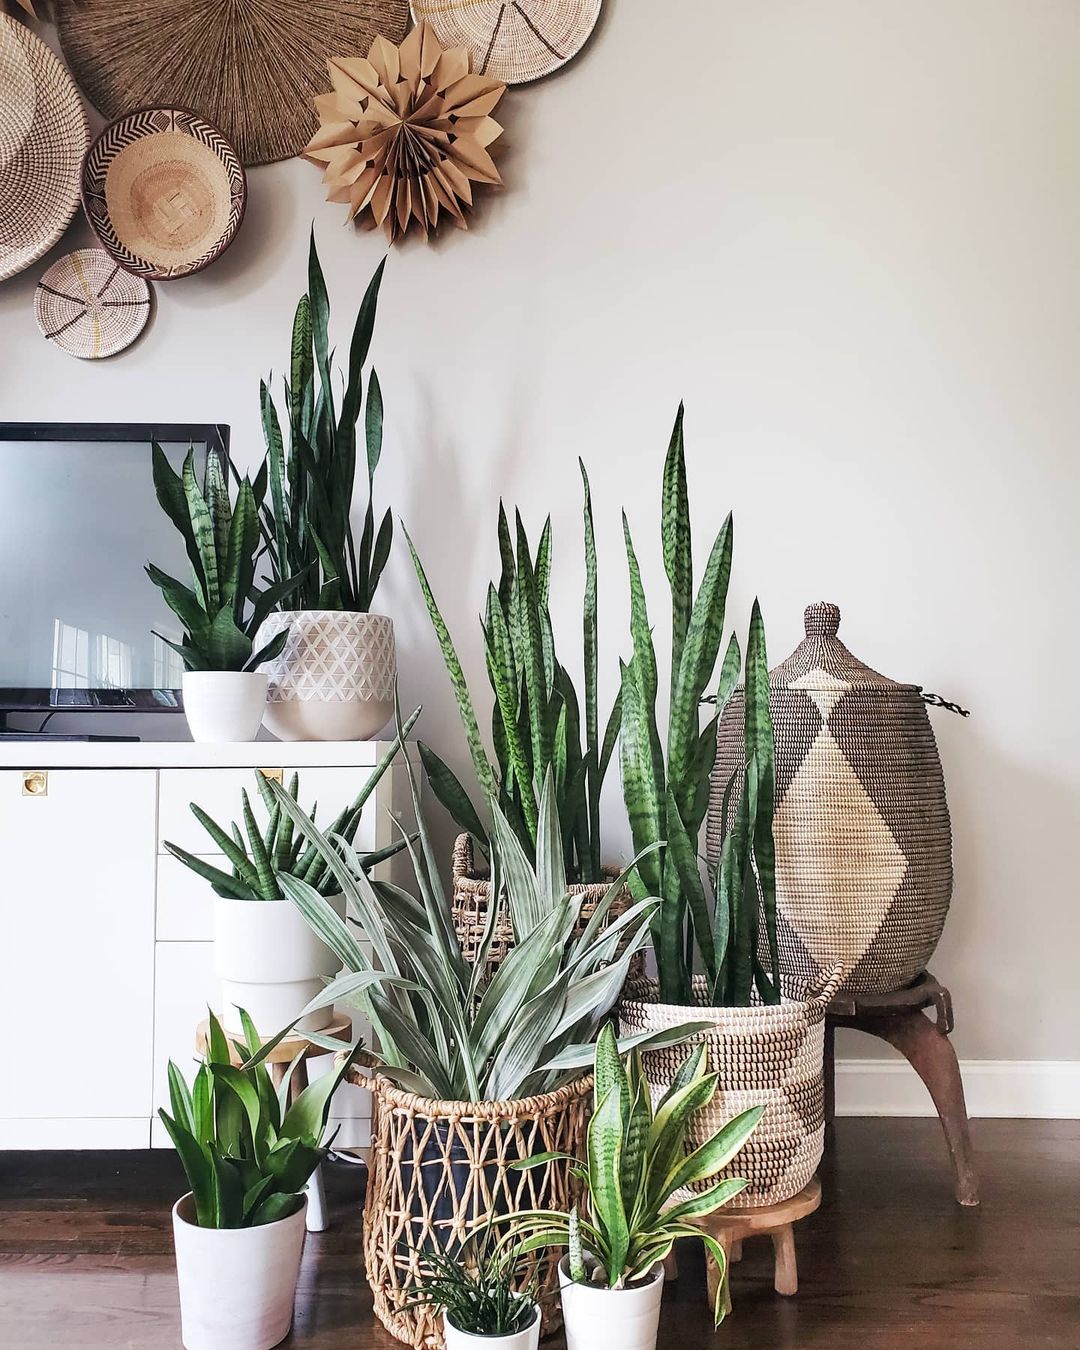 A gathering of different snake plants, which are known for their extra strong air-purifying properties. Photo by Instagram user @flora_and_furnish.